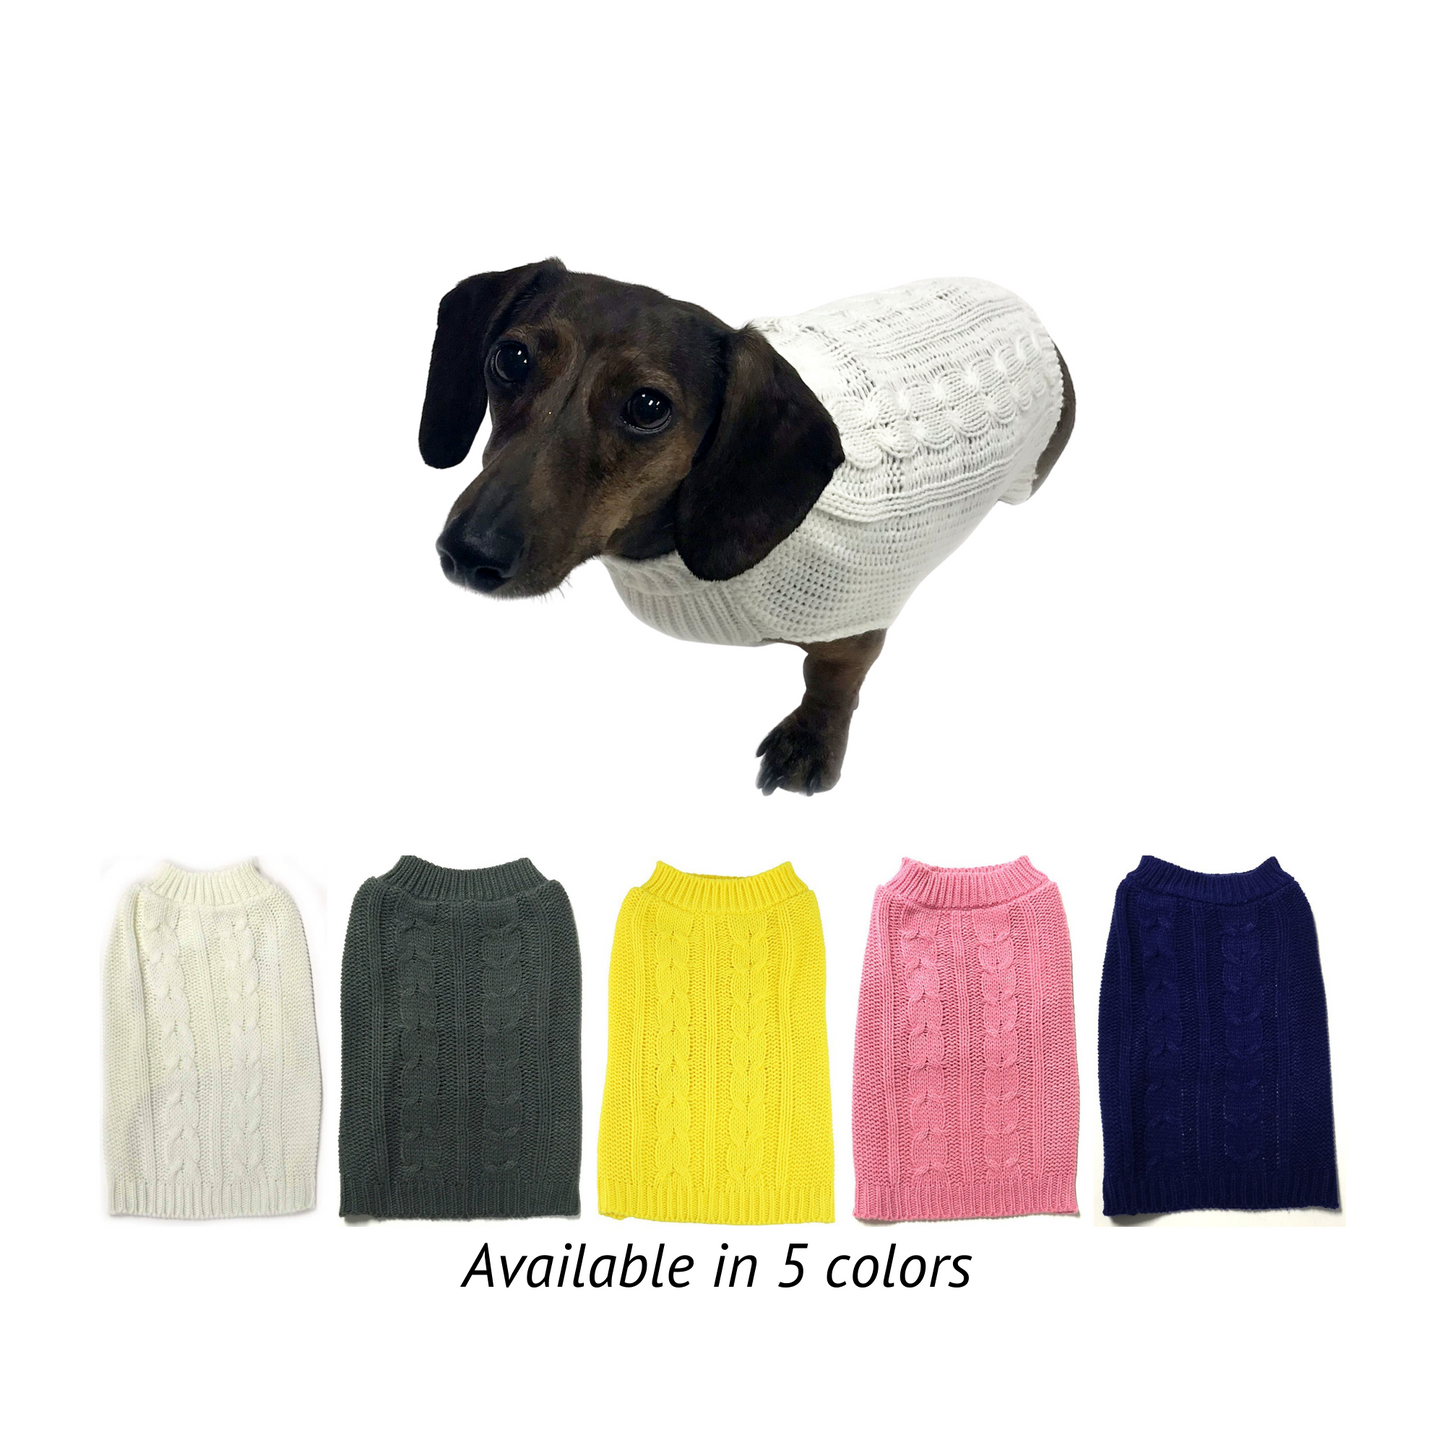 Midlee Cable Knit Dog Sweater (Small, Yellow)